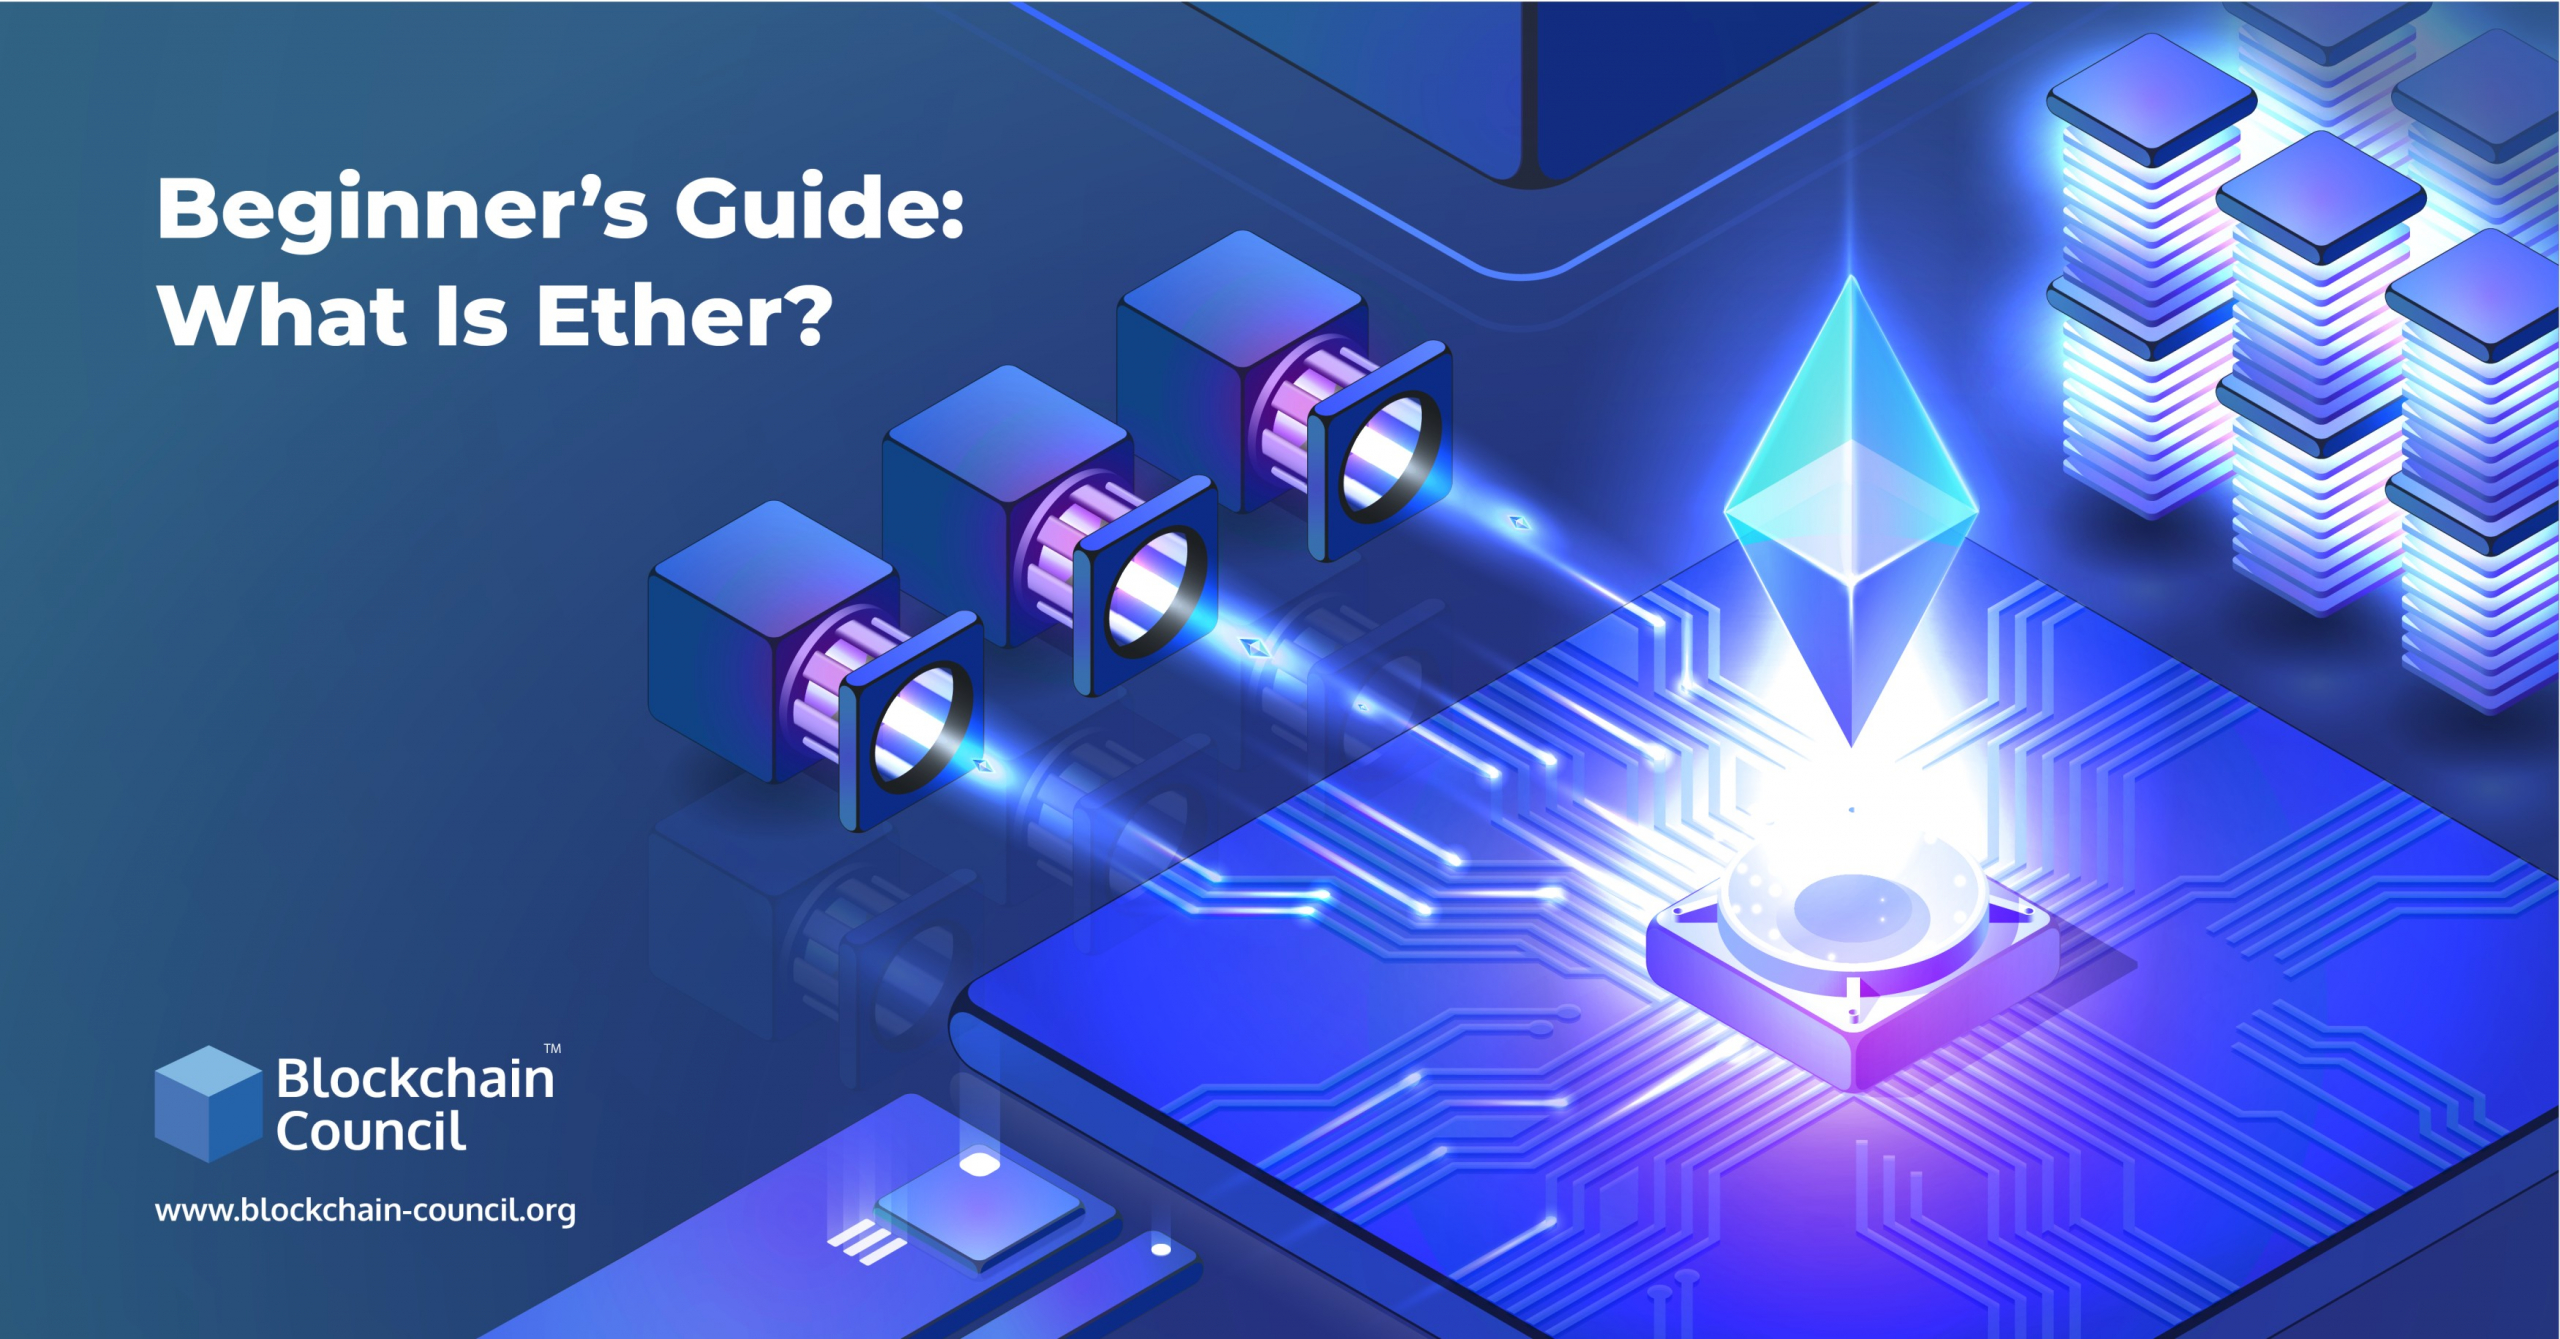 is ether the same as ethereum